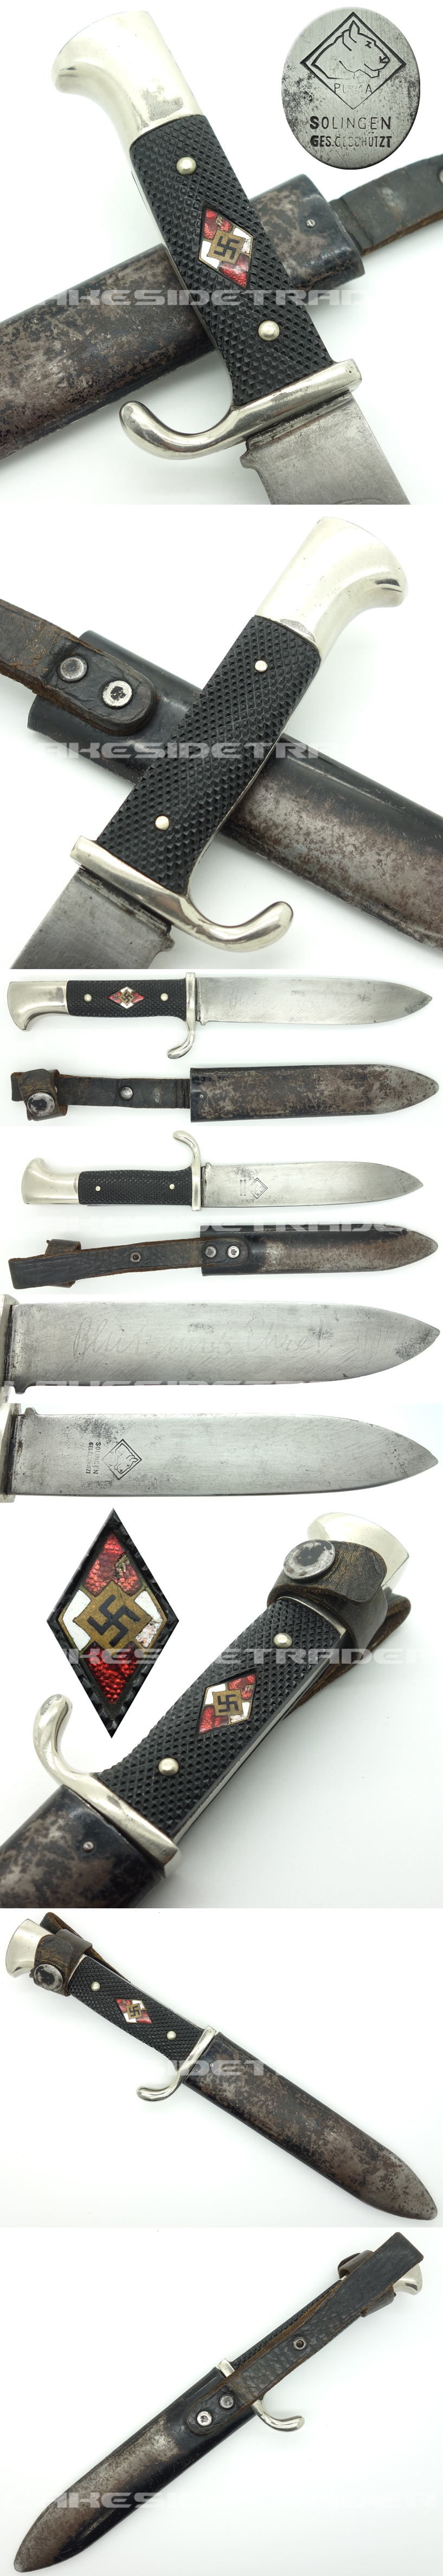 Early Hitler Youth Knife by Puma